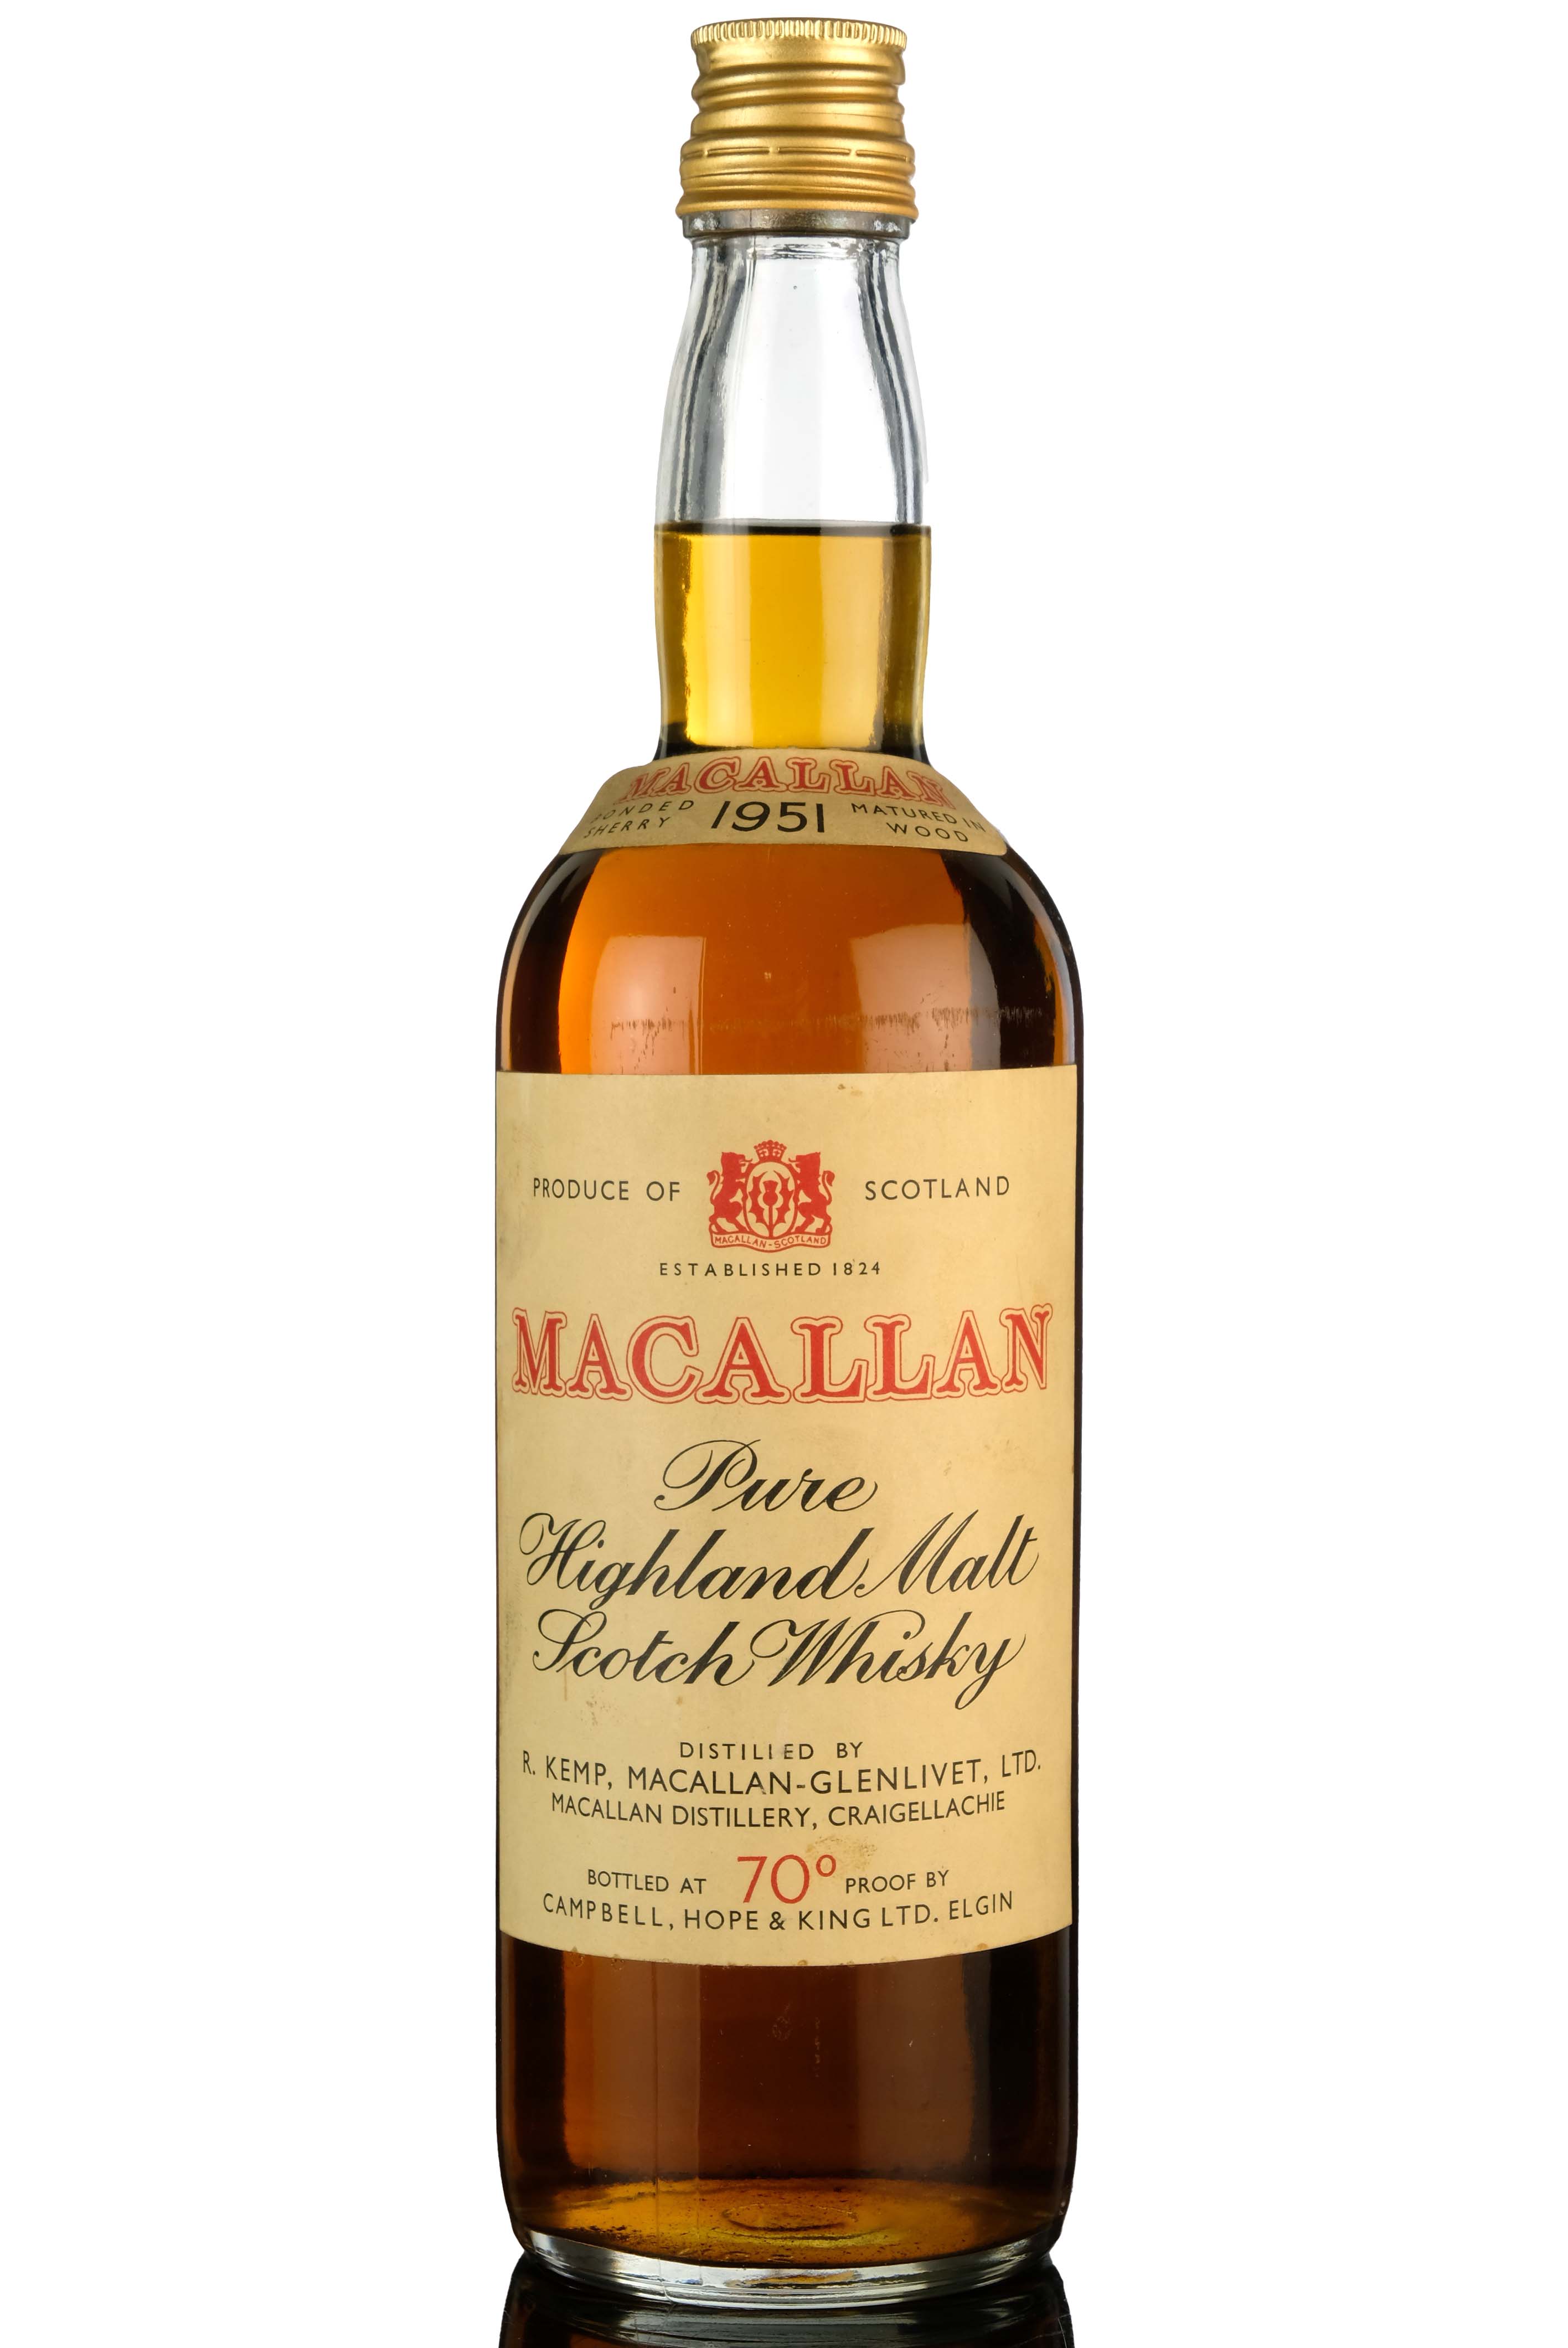 Macallan 1951 - Campbell Hope & King - Early 1960s